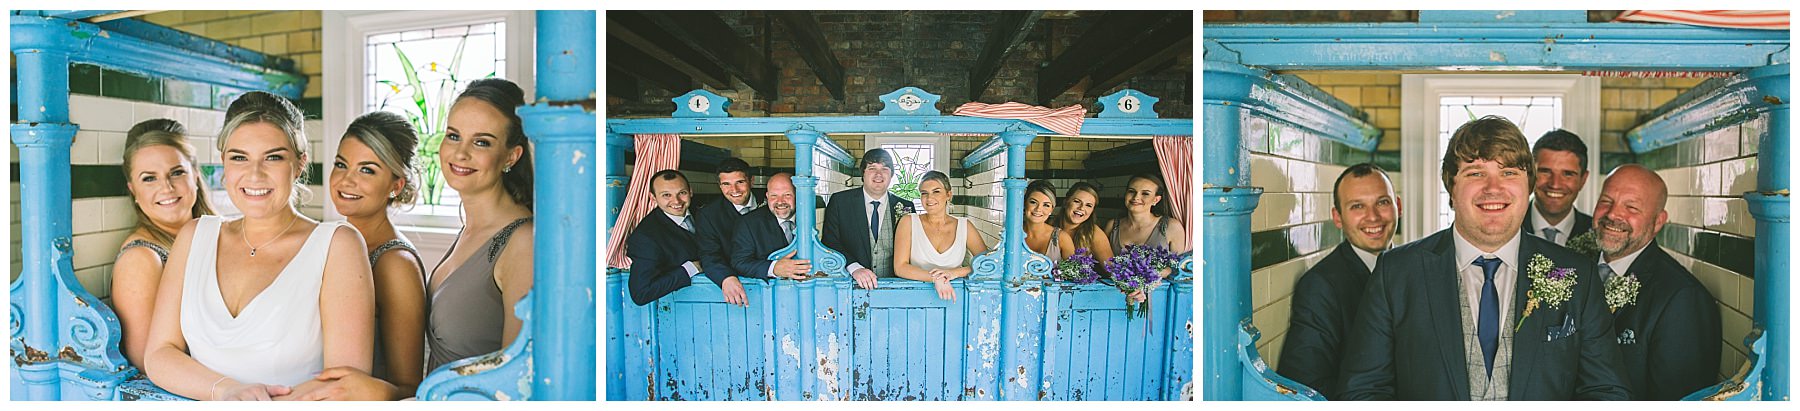 Bridesmaids and Groomsmen in the changing stalls at Victoria Baths